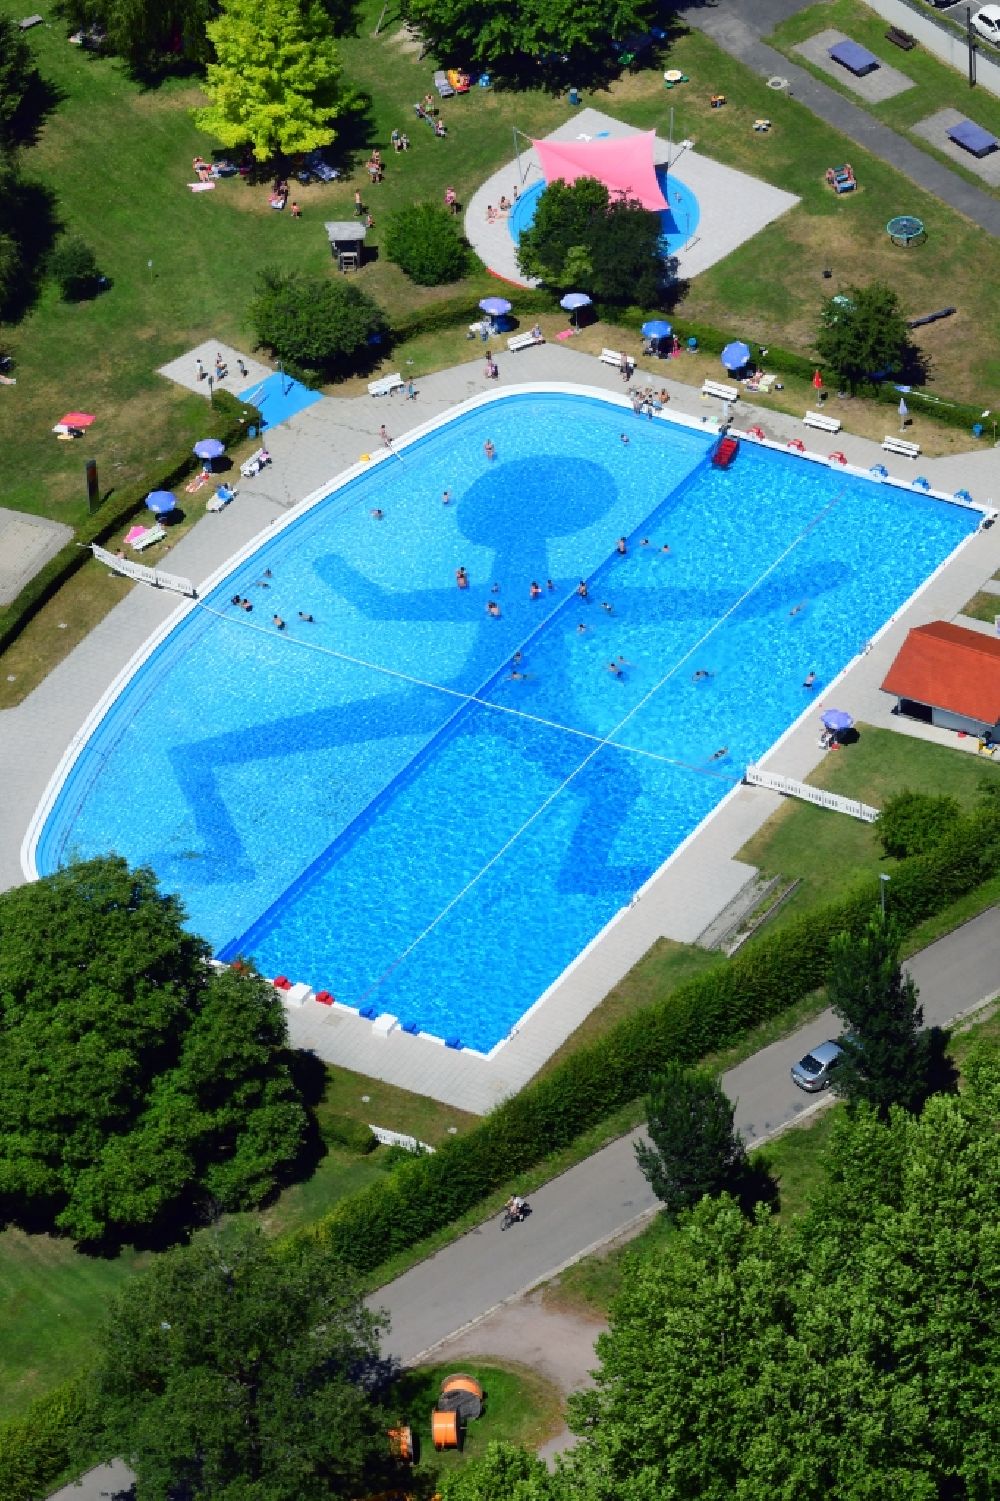 Waldshut-Tiengen from above - Swimming pool at the bank of river Rhine in Waldshut-Tiengen in the state Baden-Wuerttemberg, Germany